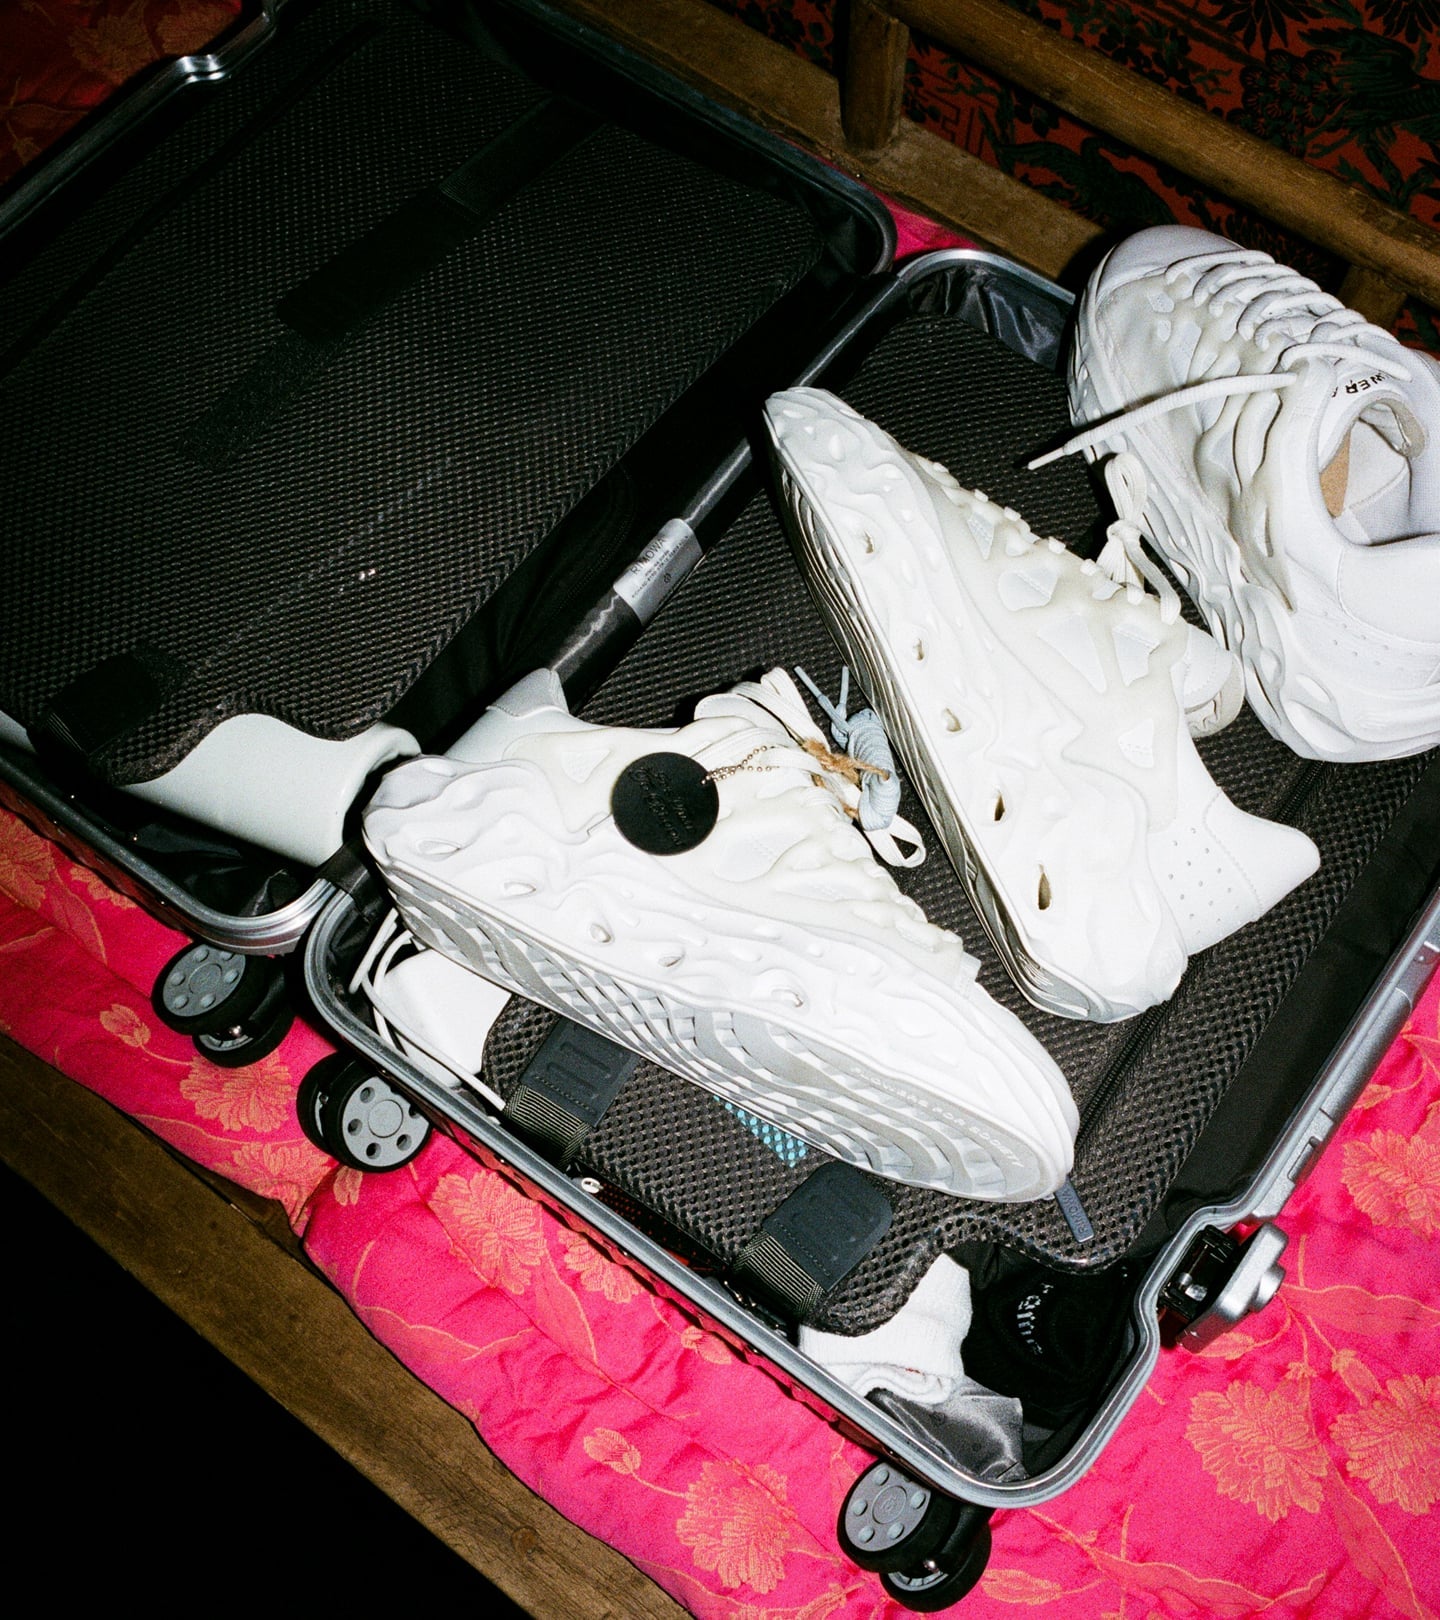 Radicle OG Sneaker in an open suitcase